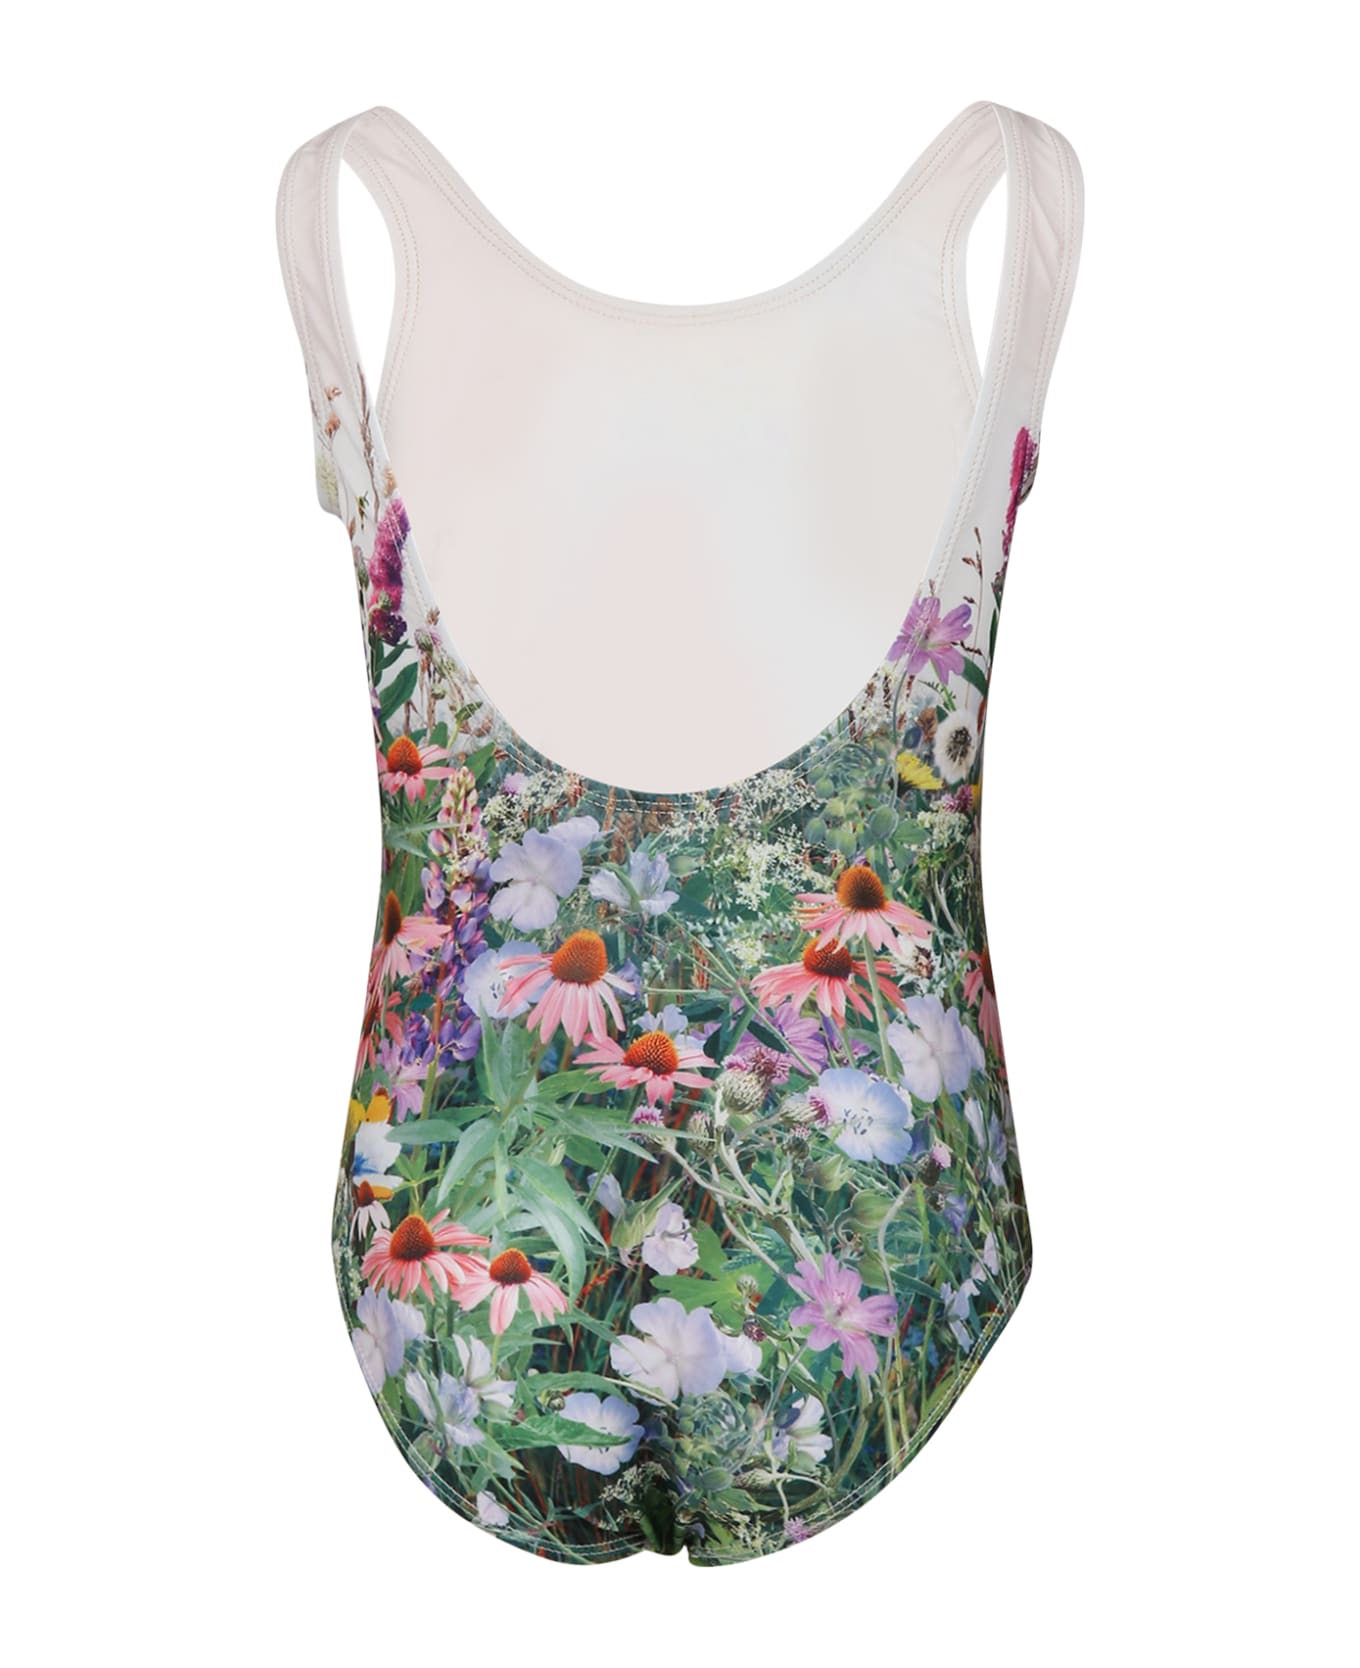 Molo Ivory Swimsuit For Girl With Horses And Flowers Print - Ivory